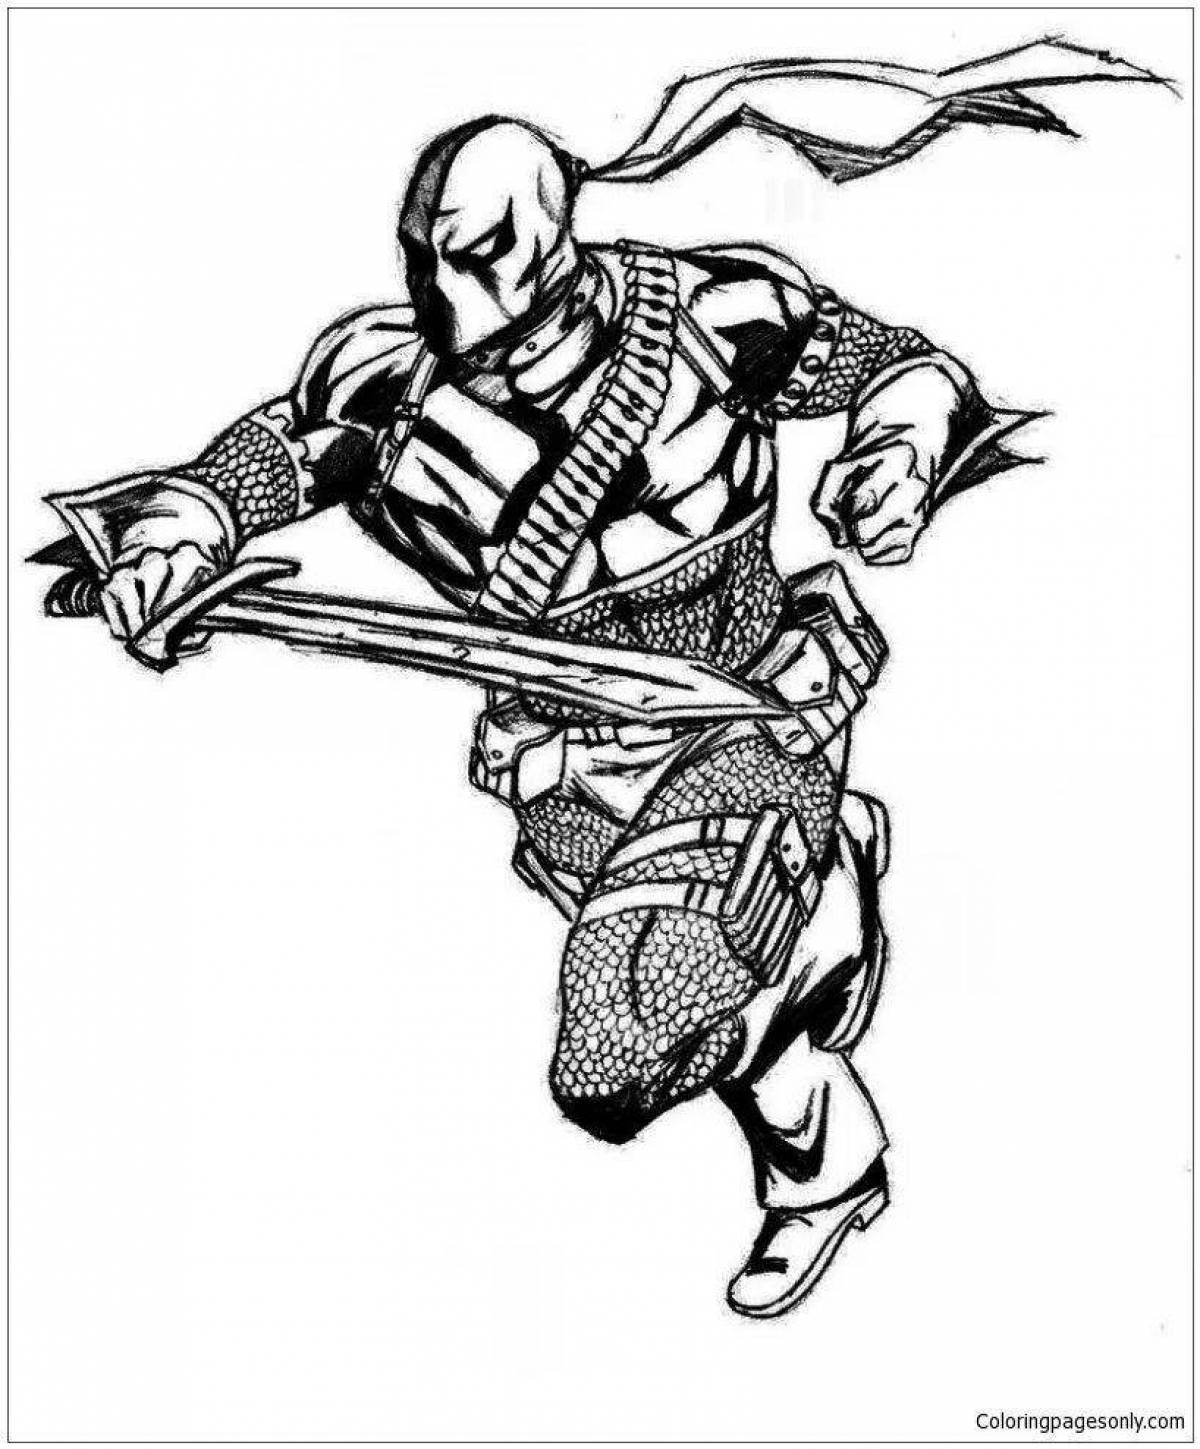 Playful injustice 2 coloring page